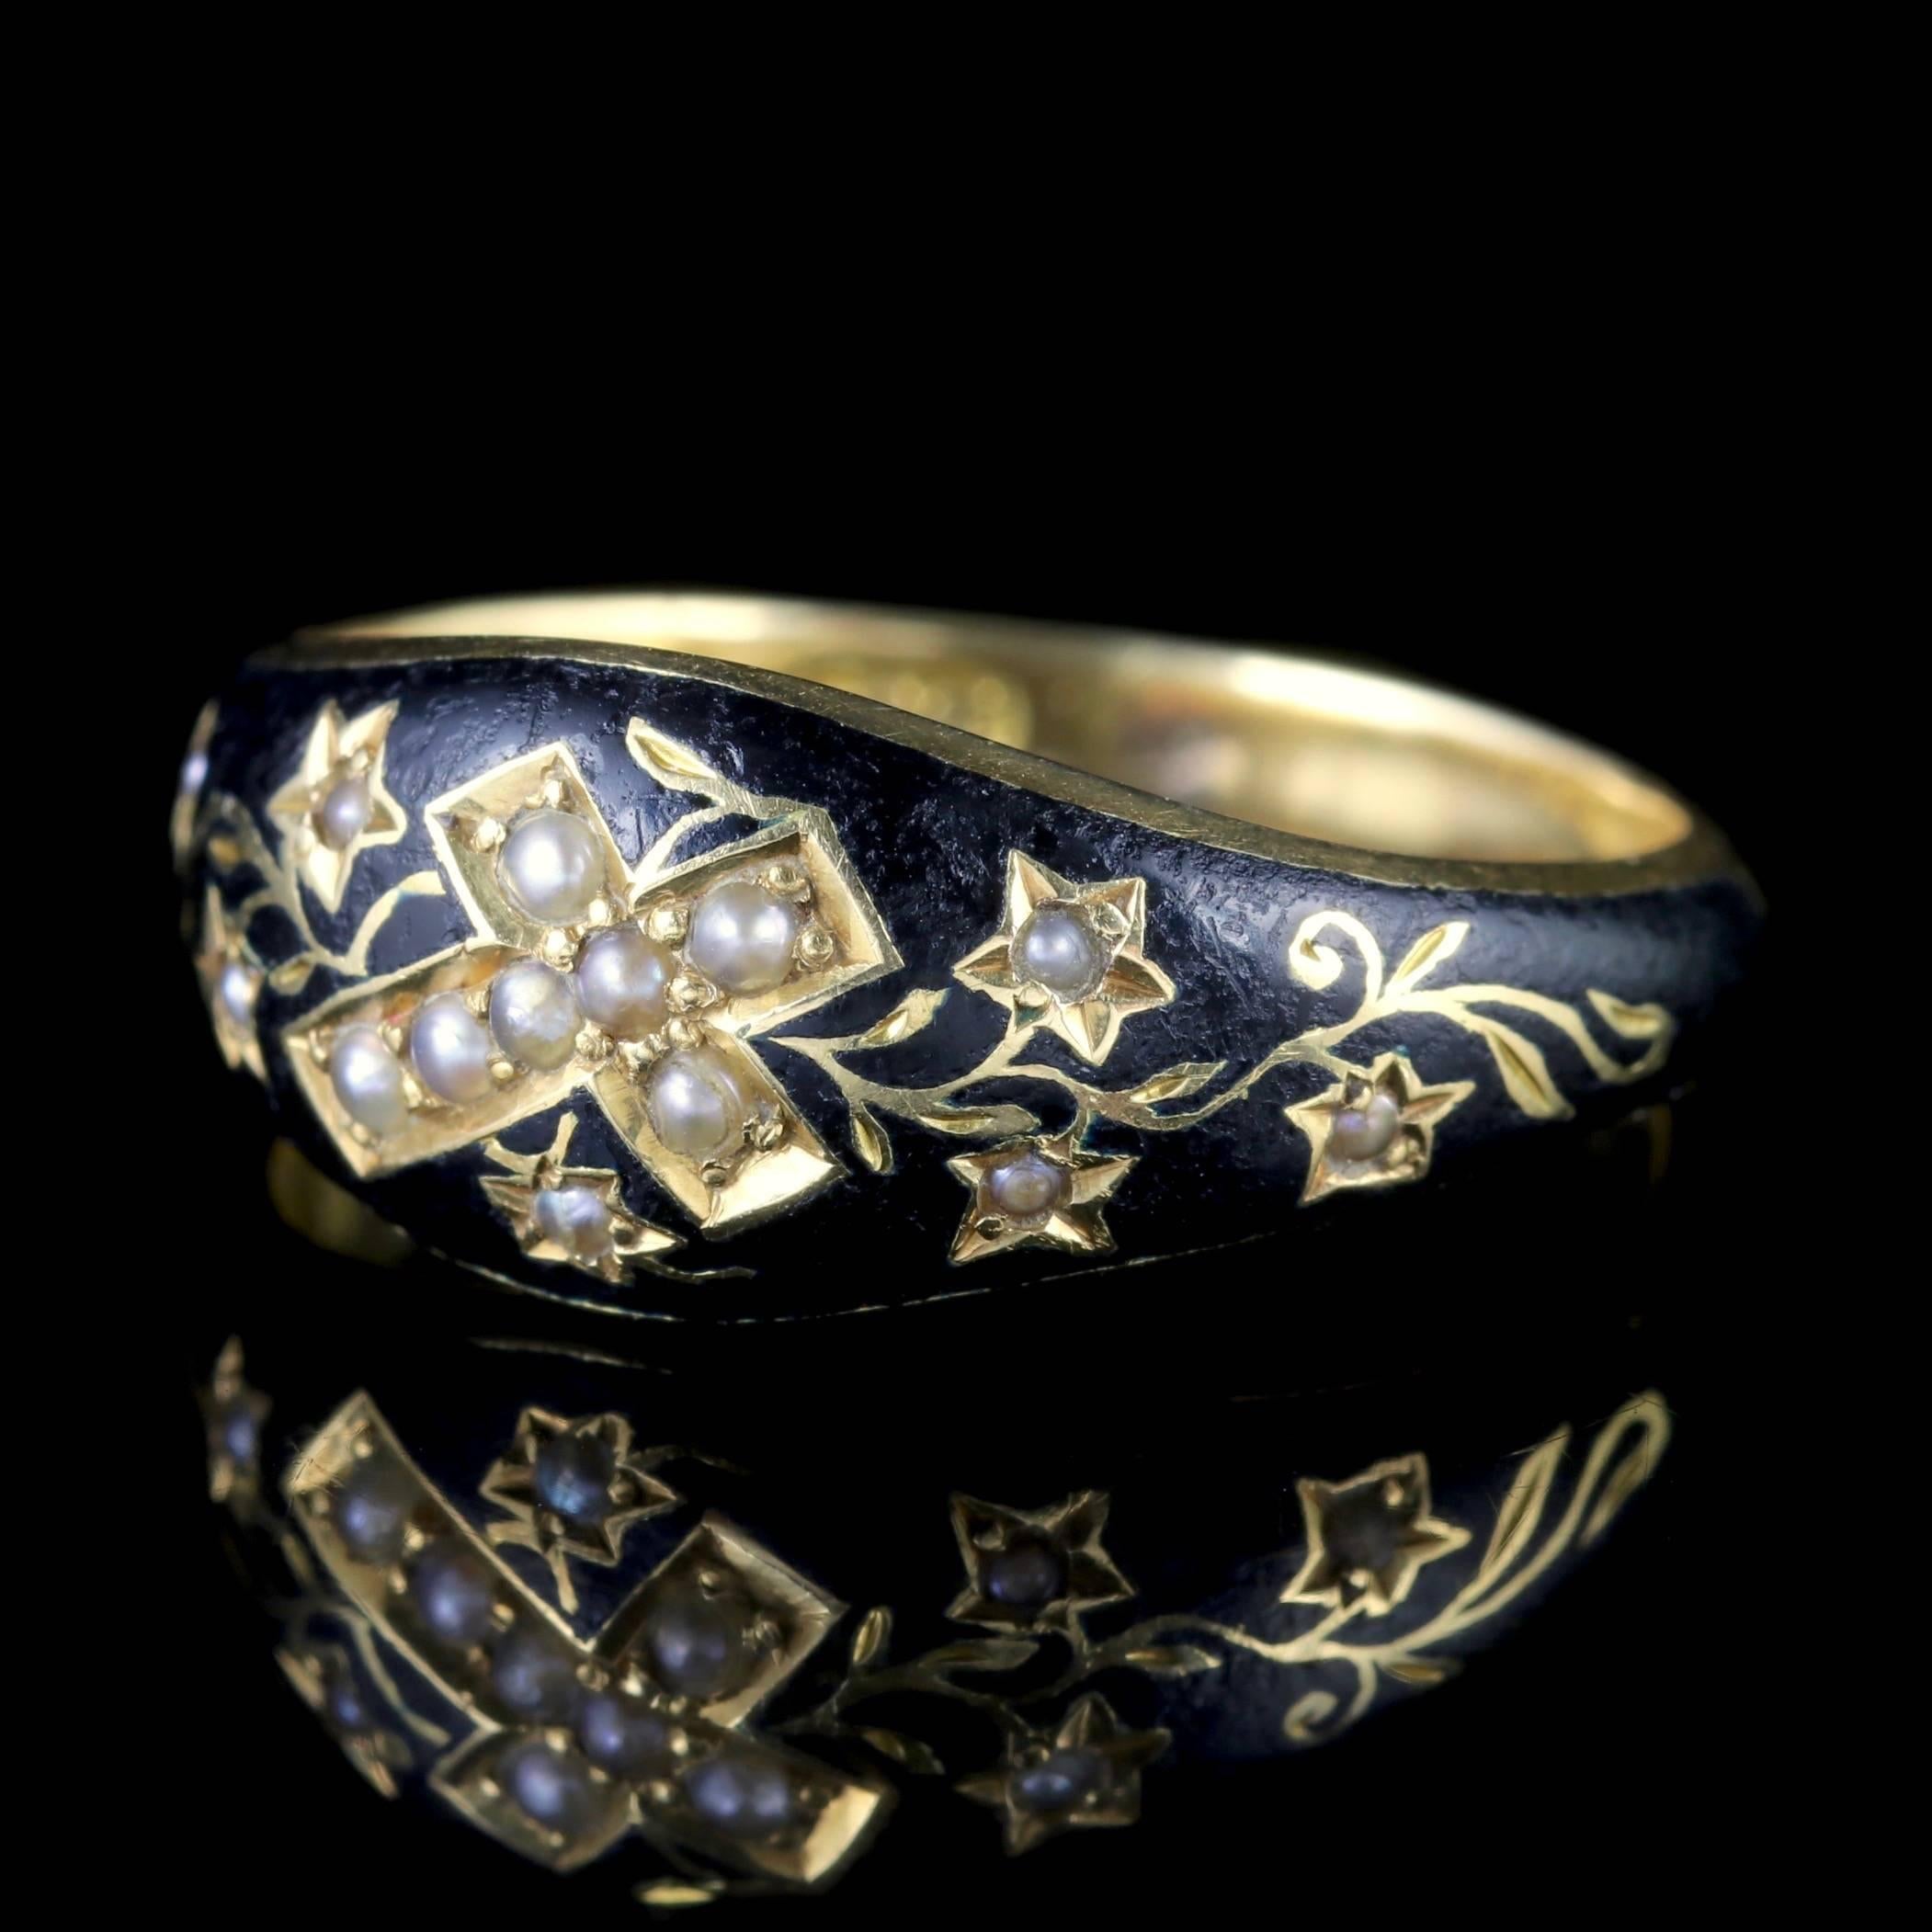 To read more please click continue reading below-

This fabulous 18ct Gold antique mourning ring is genuine Edwardian dated 1901.

The front of the ring is adorned with a beautiful Pearl Cross and decorated in foliate motifs set with Pearls across